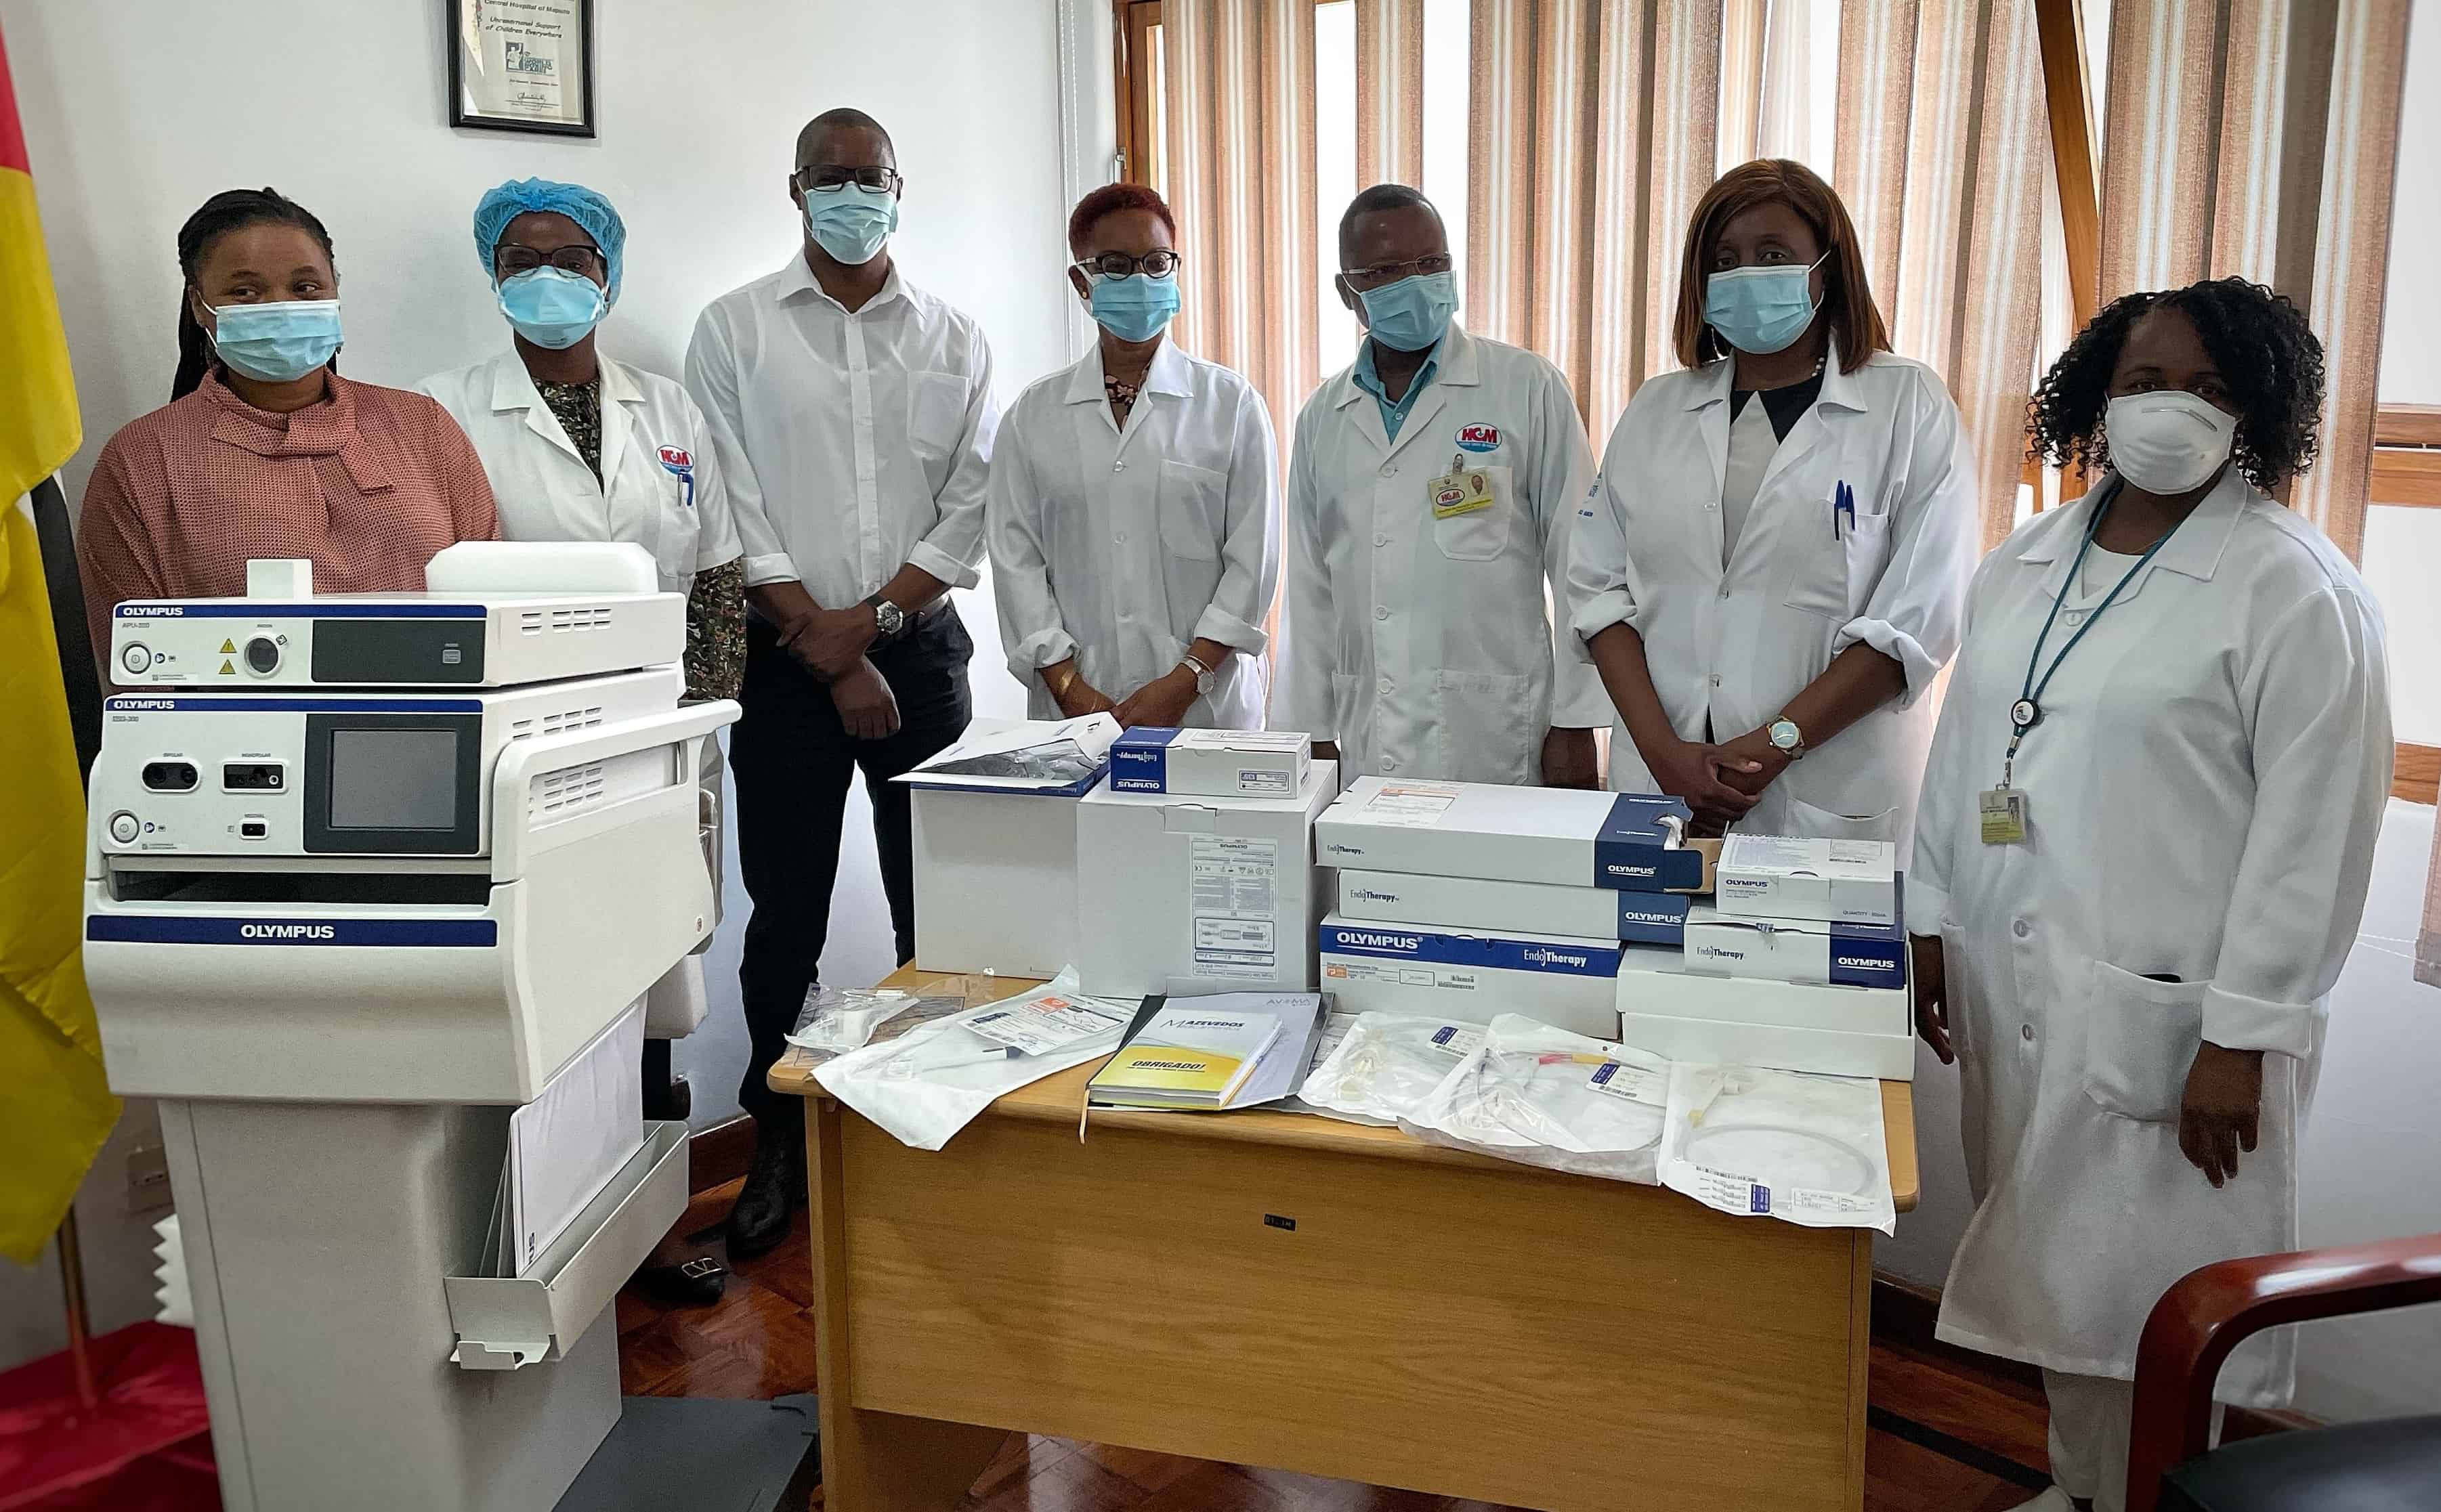 Port Maputo delivers electro-surgical equipment to the Central Hospital of Maputo